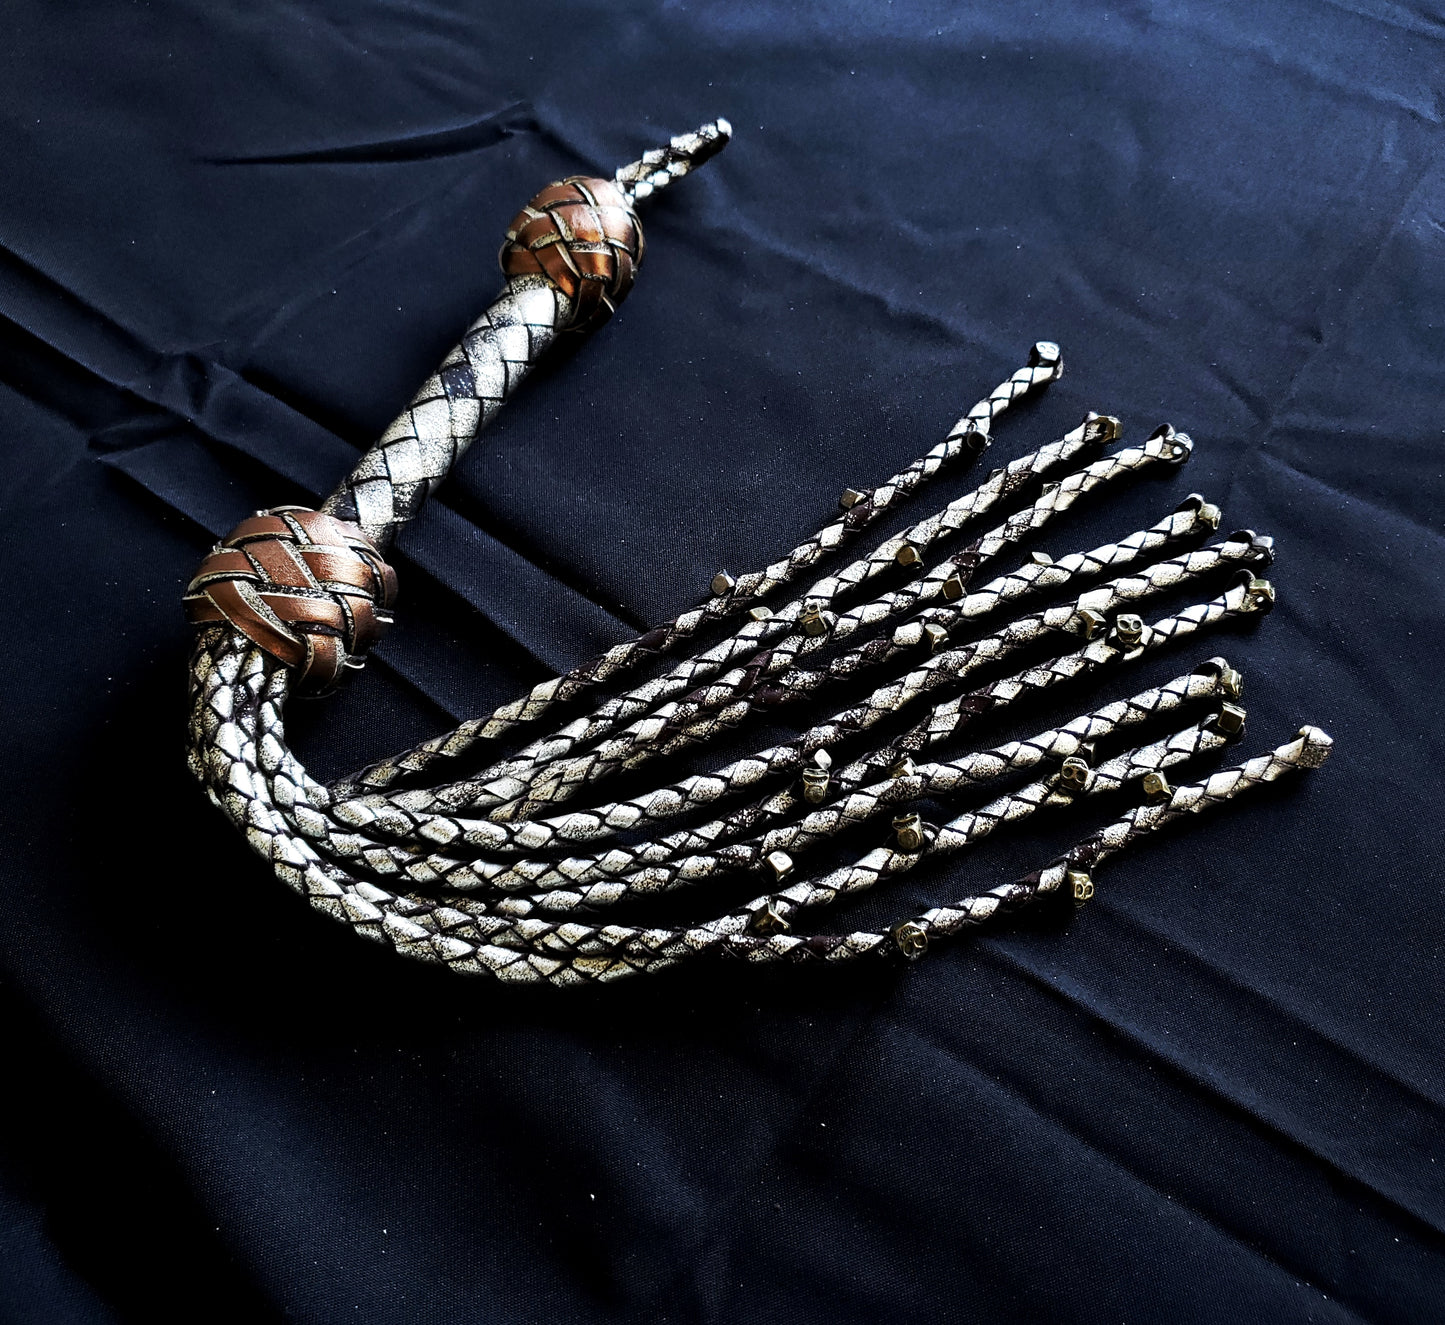 Repentance- Metal Skull Cat O Nine Tails- Made to Order